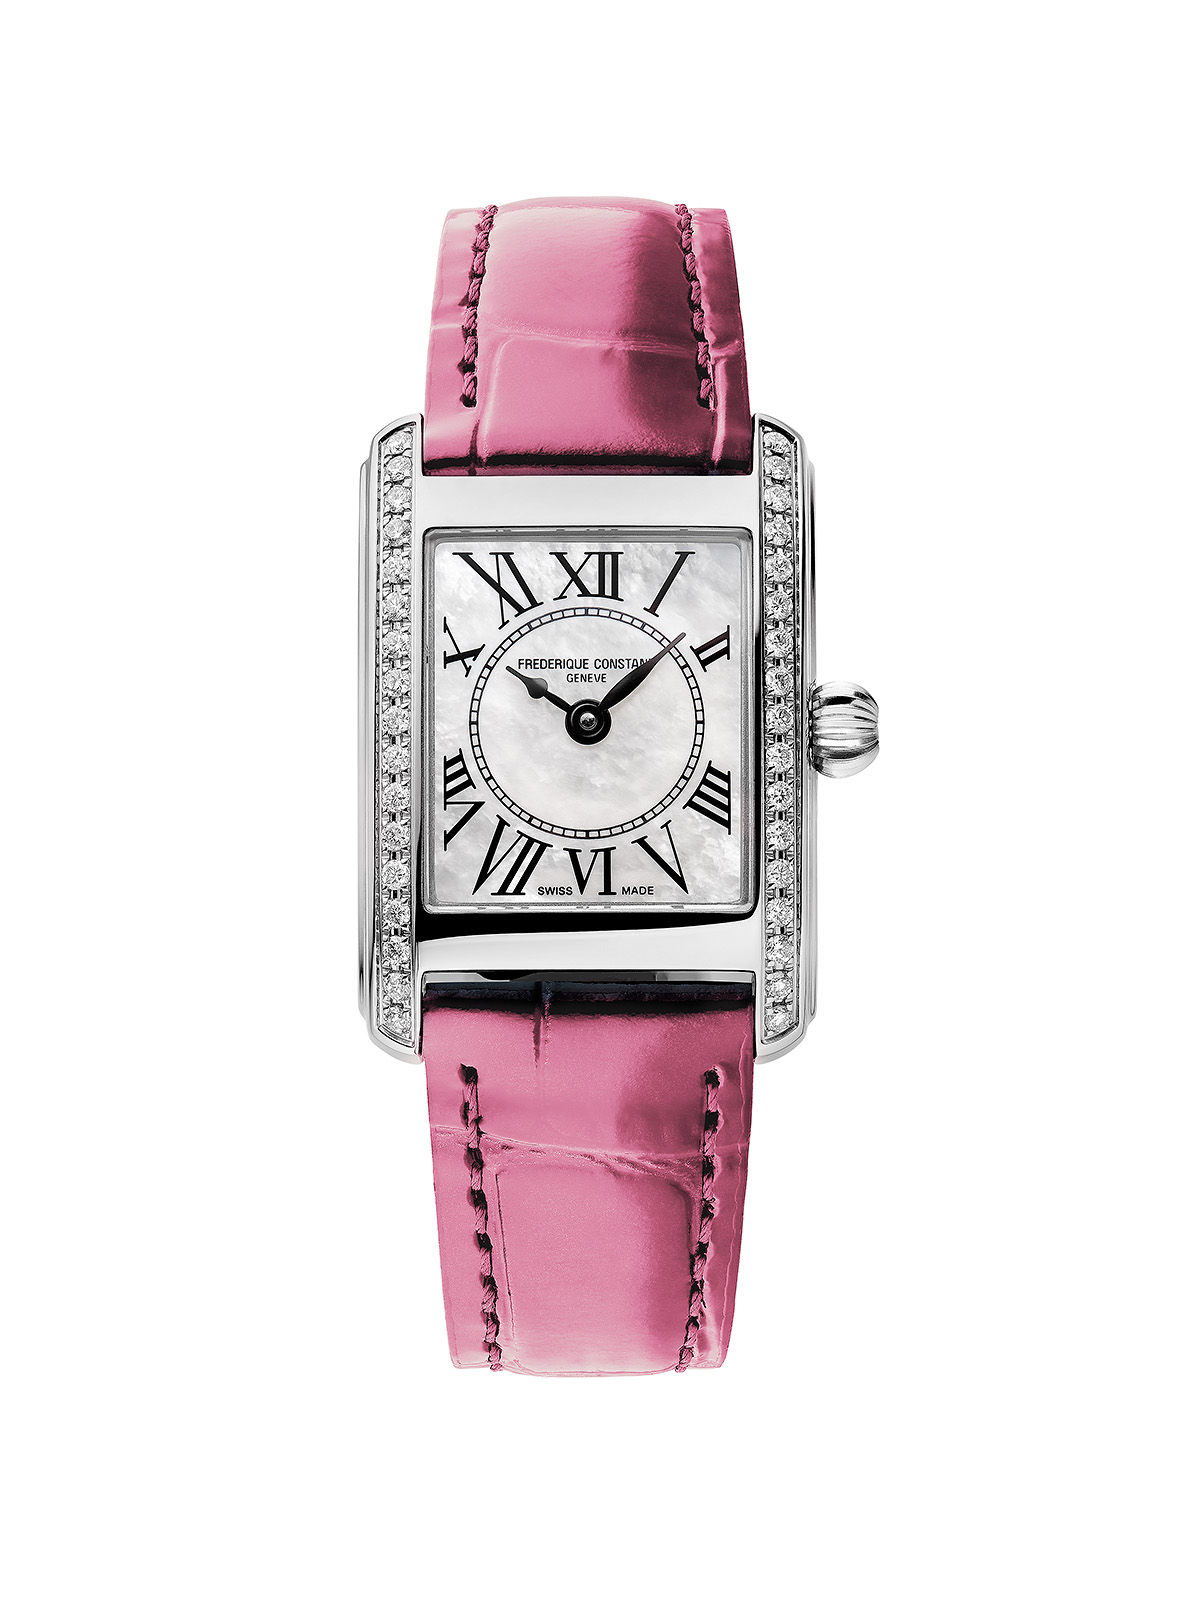 Frederique Constant Pink Ribbon Special Editions - Watch I Love